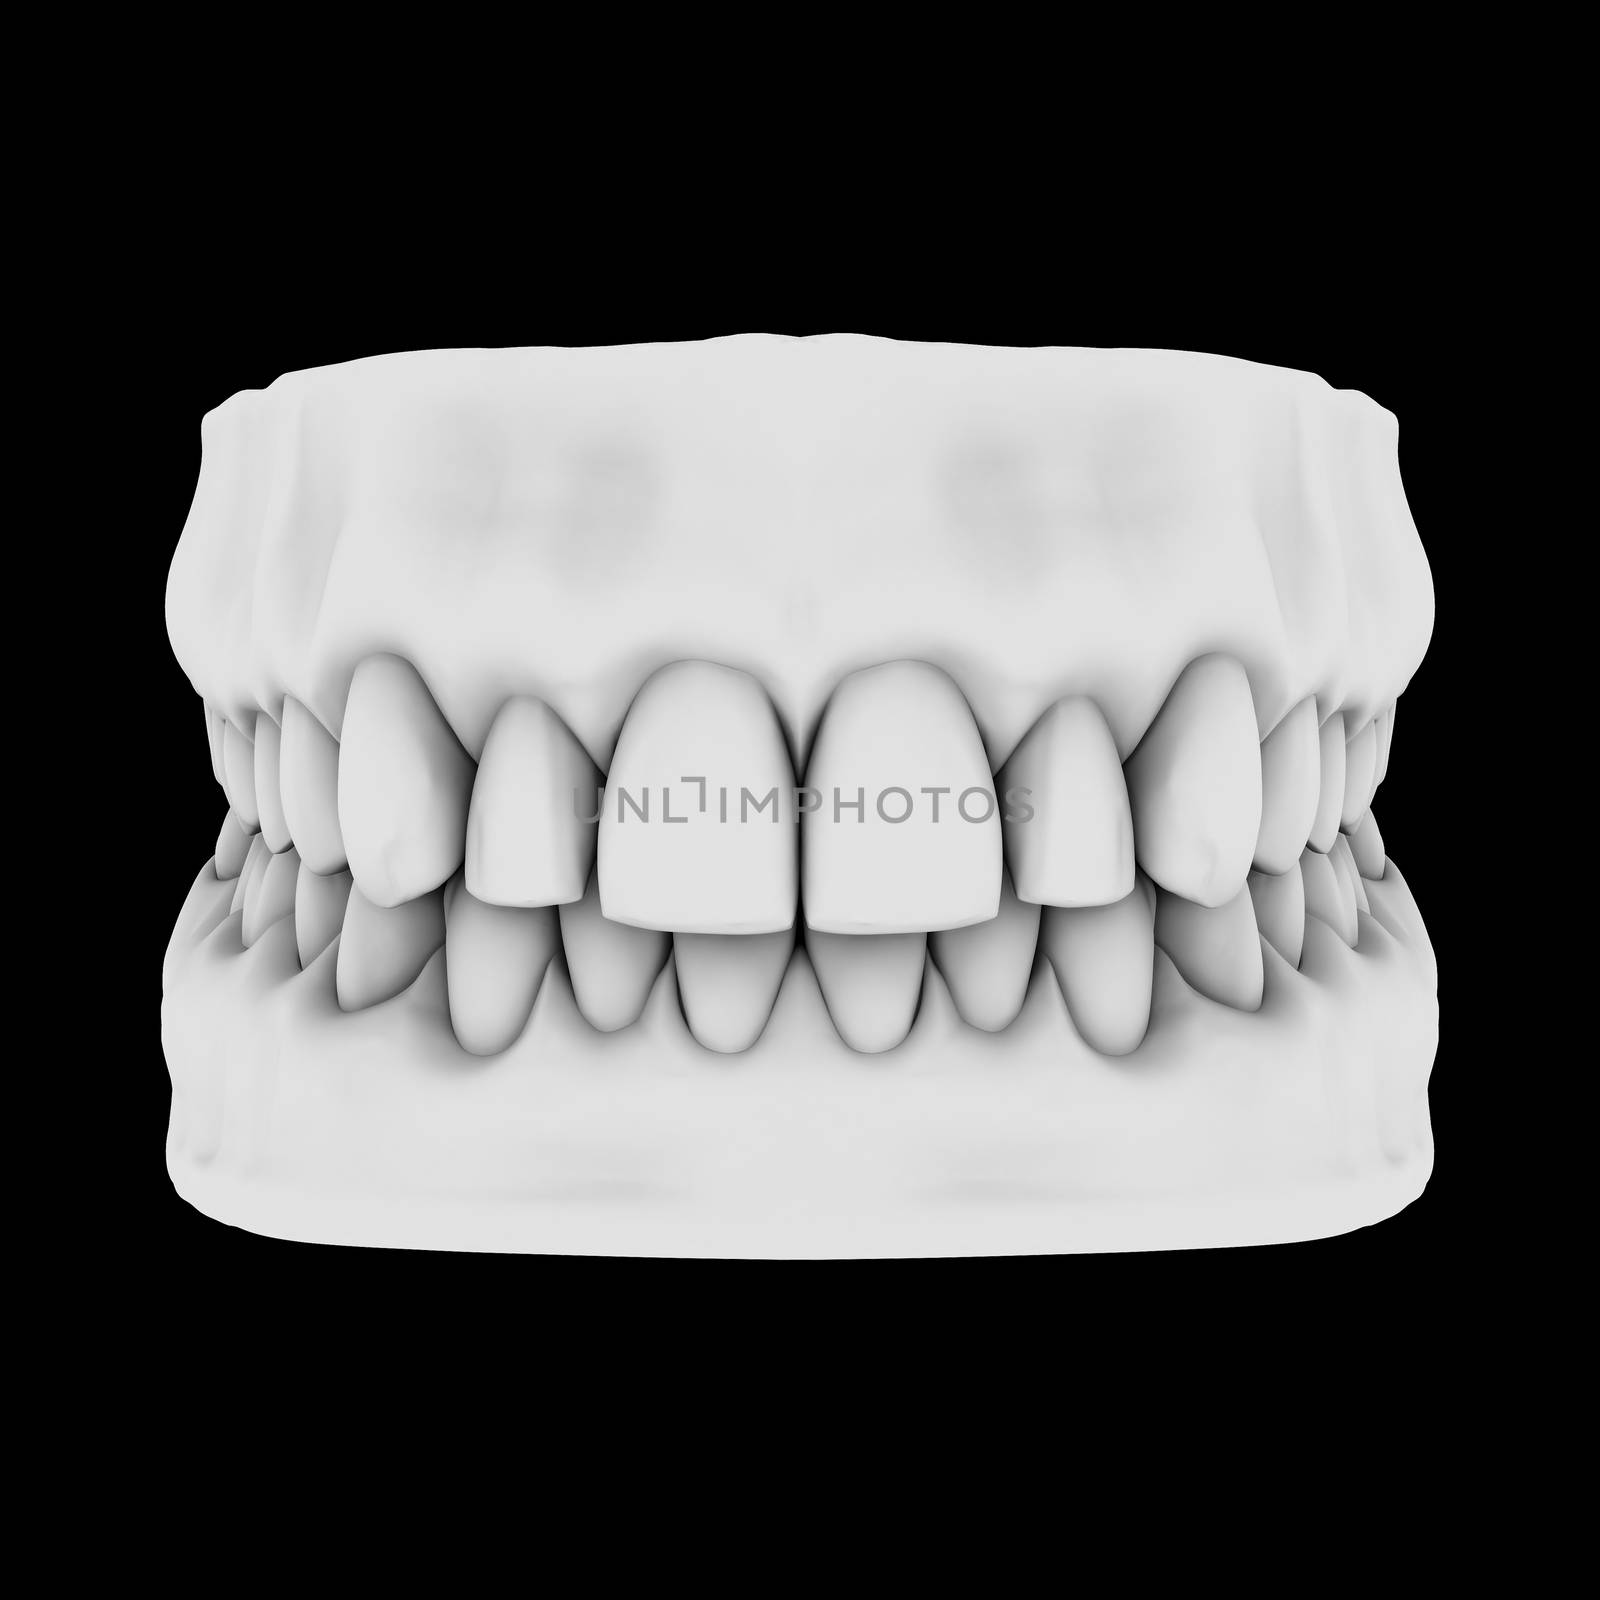 3d image of white teeth isolated on black by maya2008